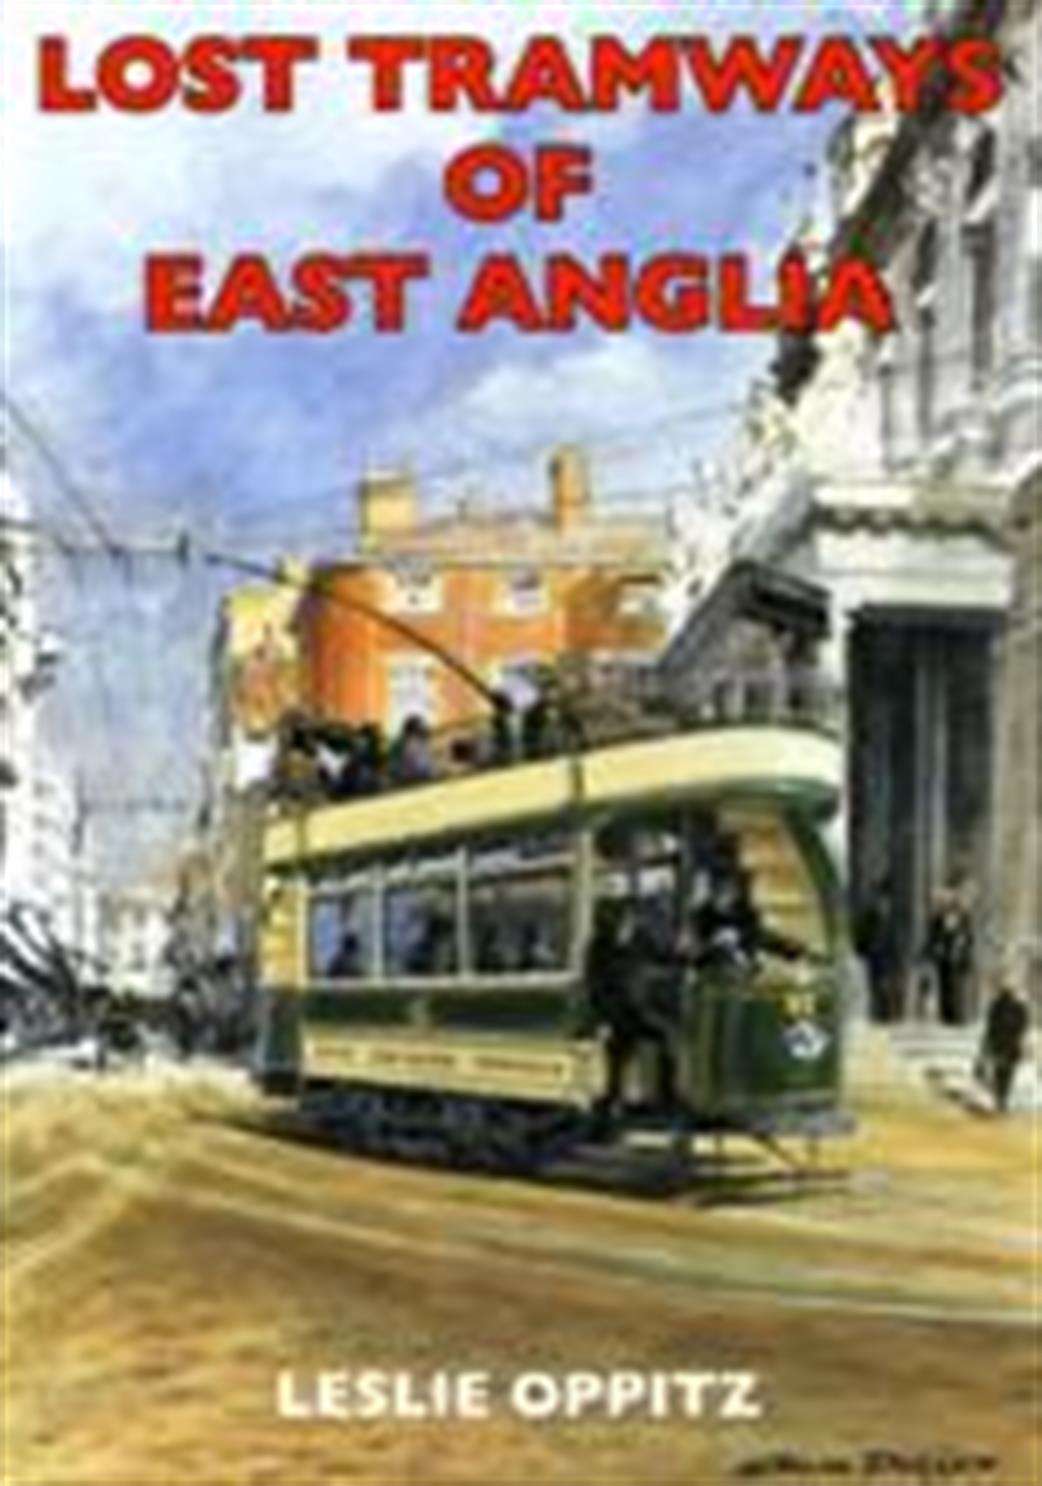 9781853068720 Lost Tramways Of East Anglia by Leslie Oppitz